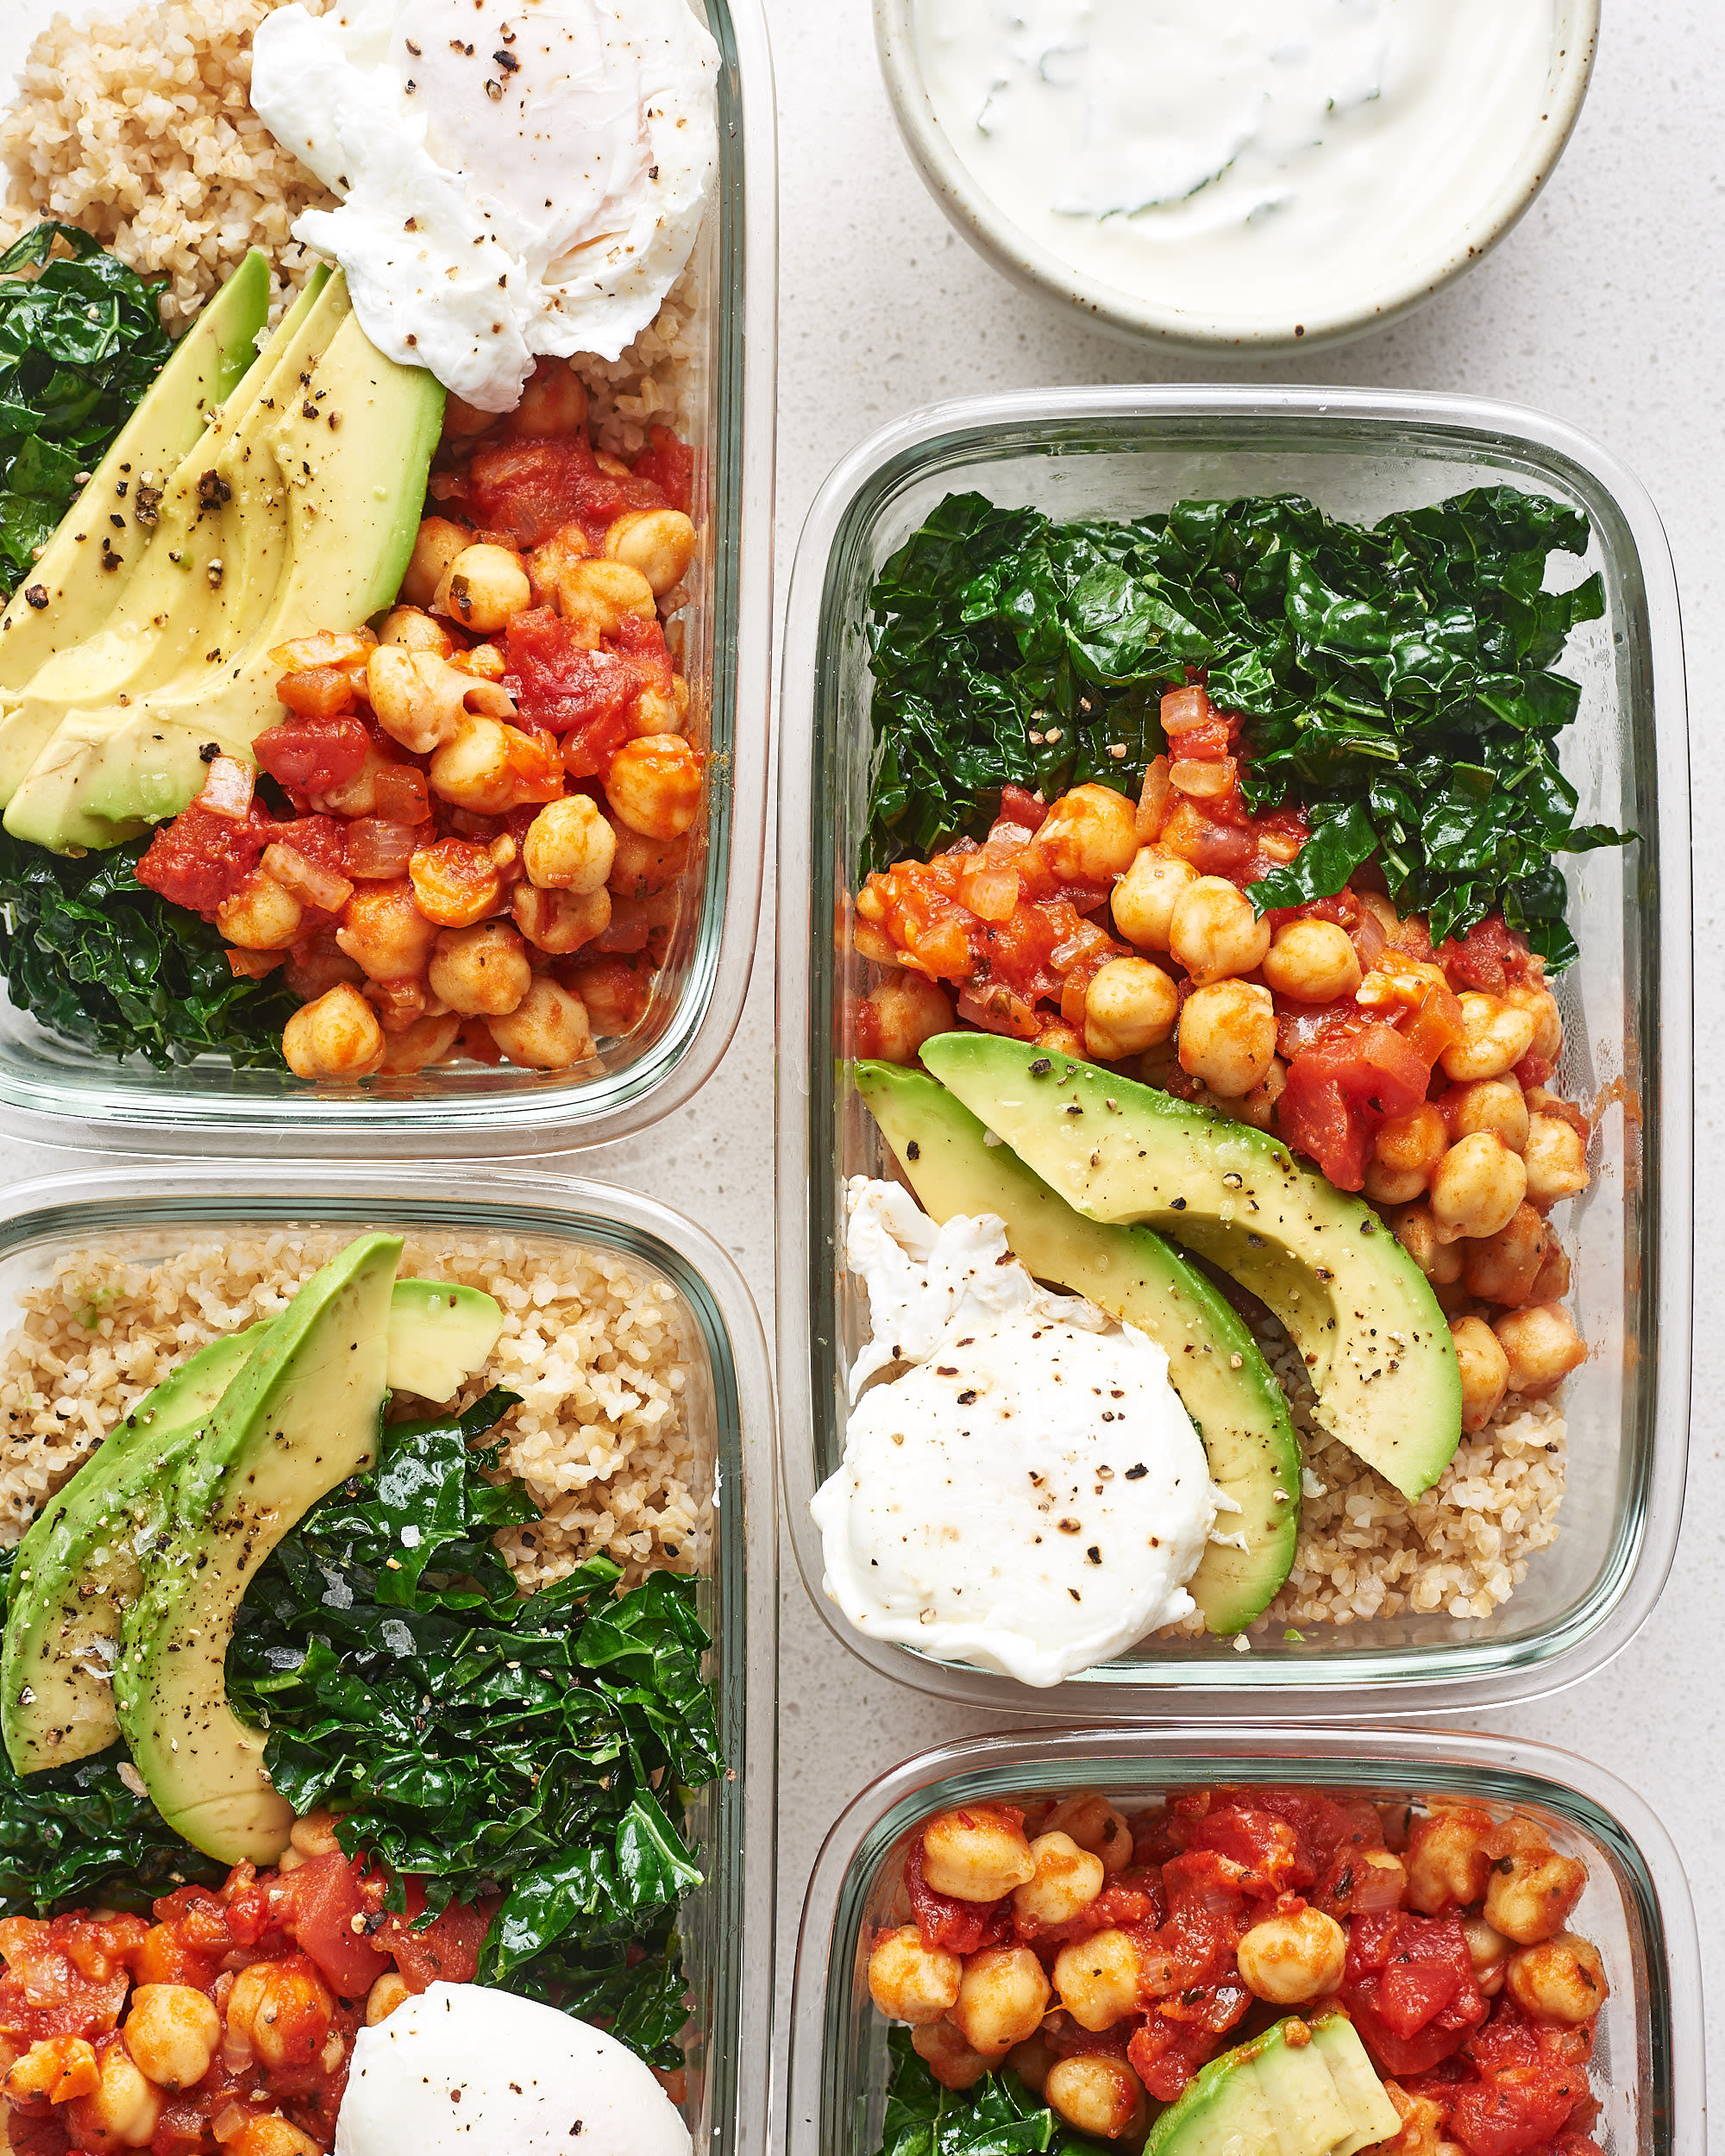 Beginner's Guide to Meal Prep